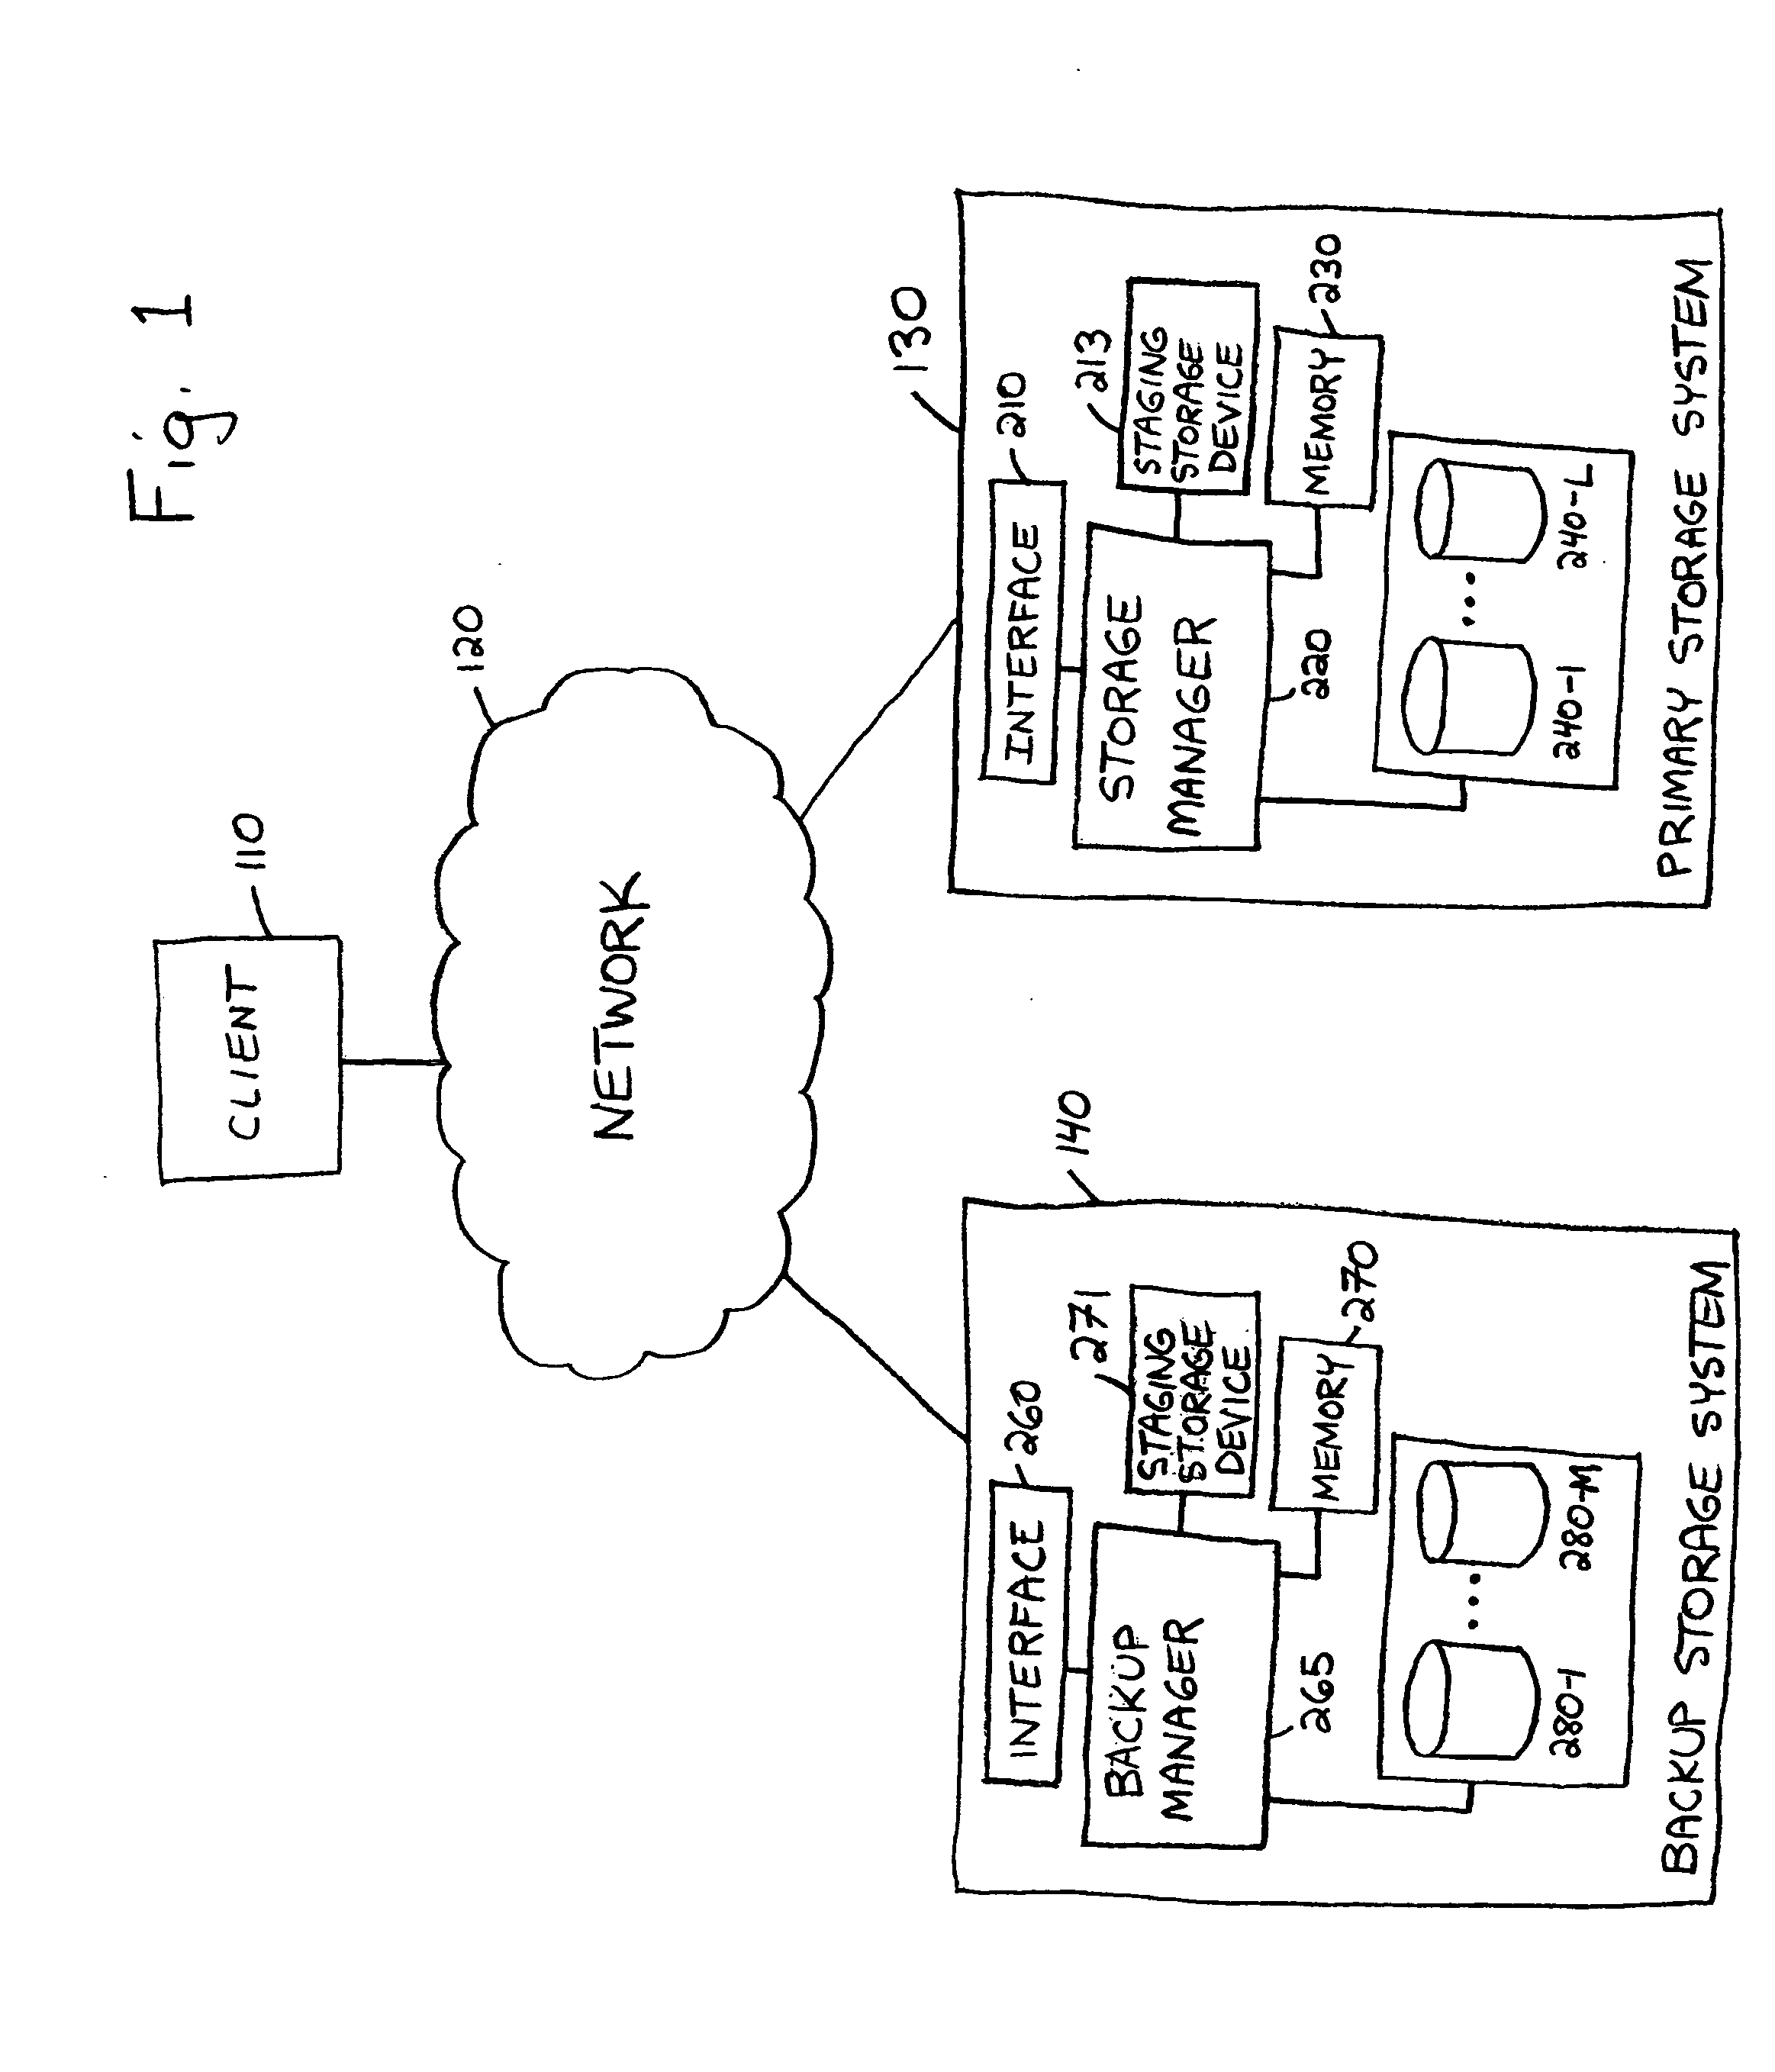 Method and system for storing data